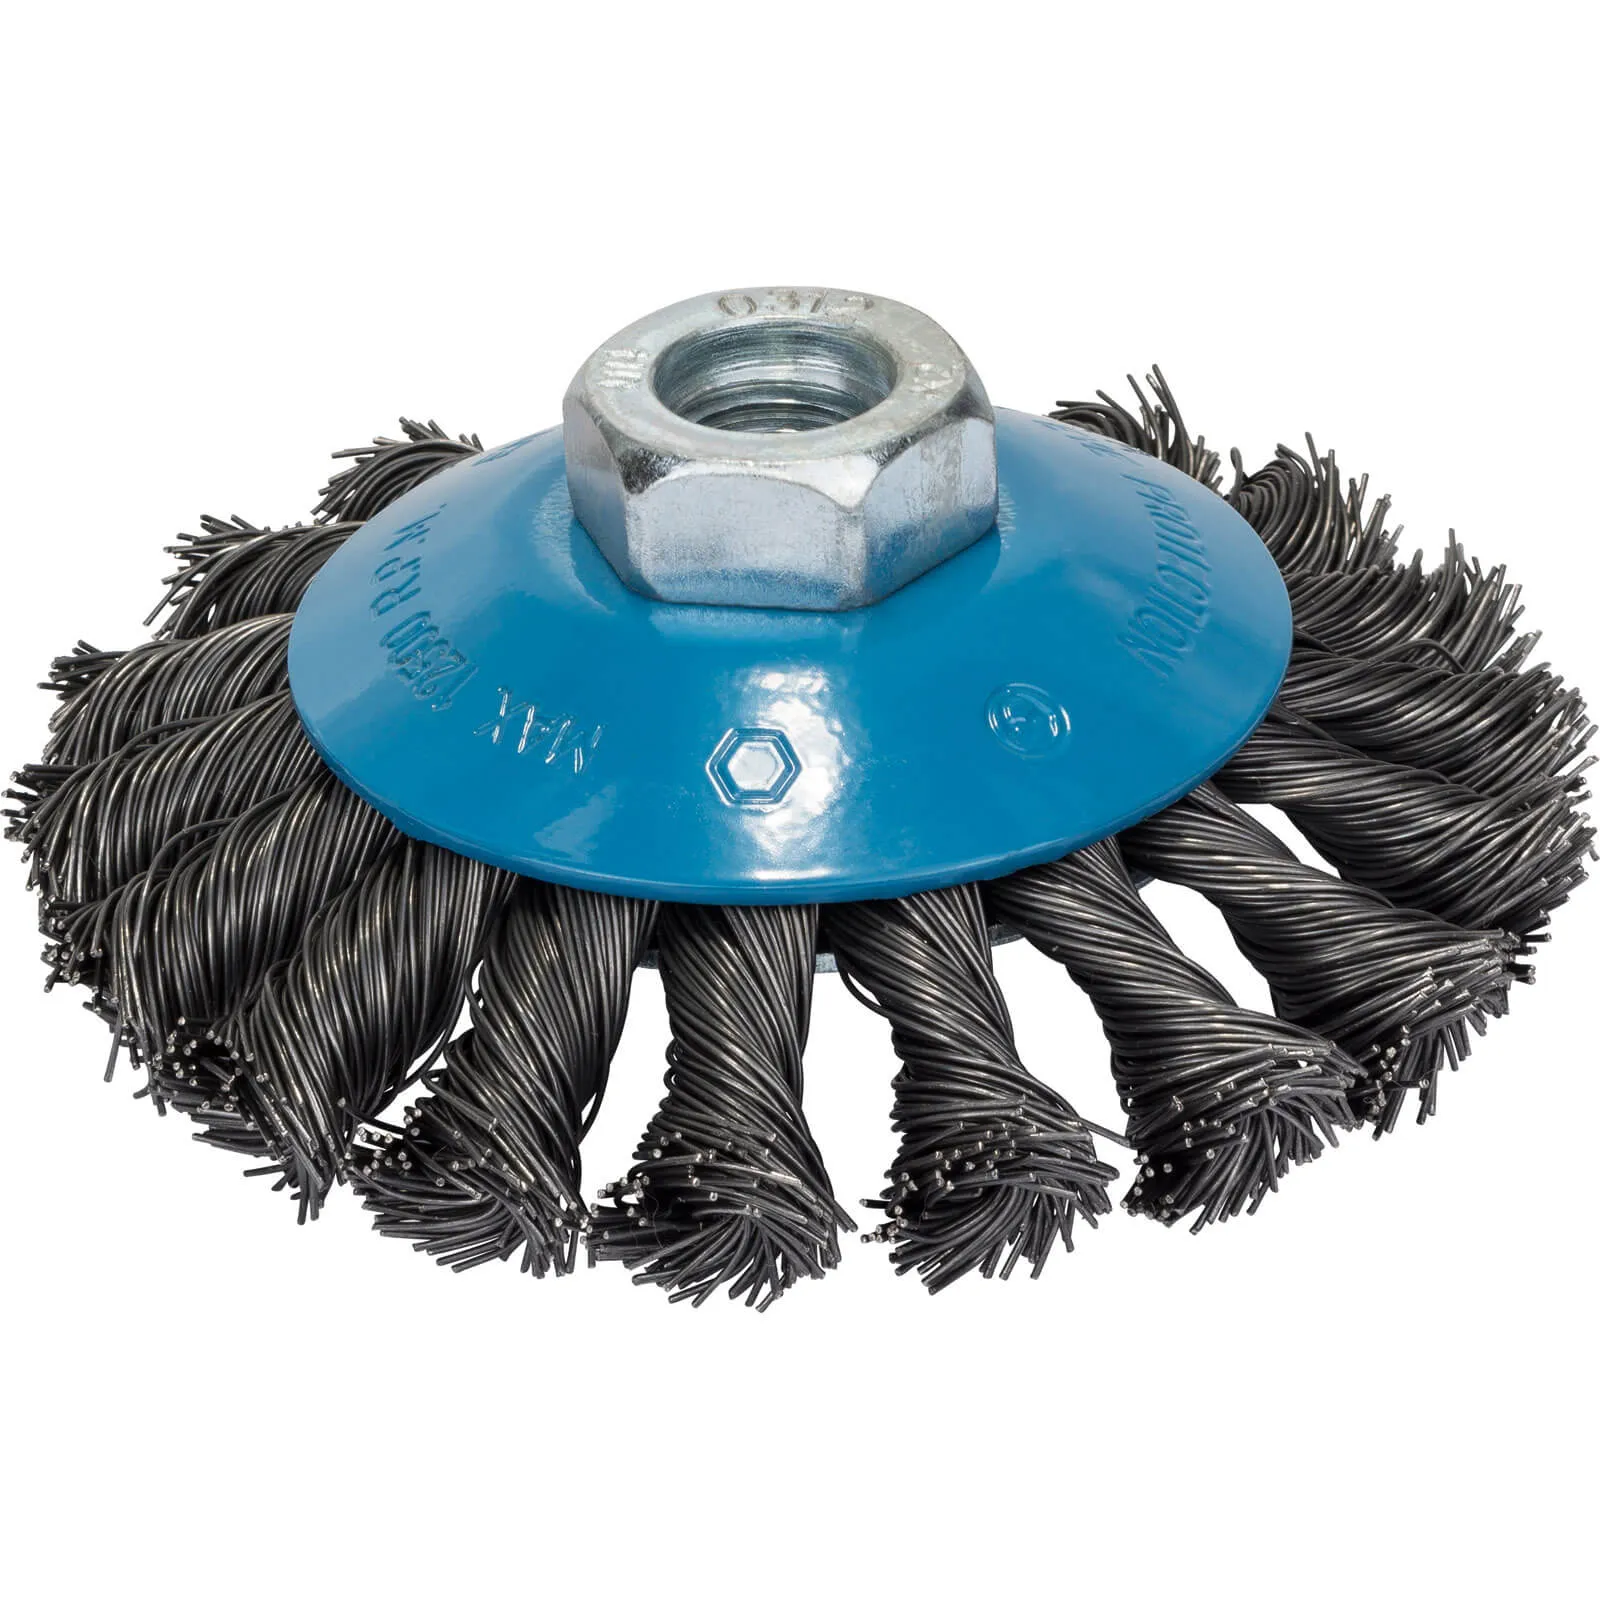 Bosch 0.5mm Knotted Conical Steel Wire Wheel Brush - 100mm, M14 Thread